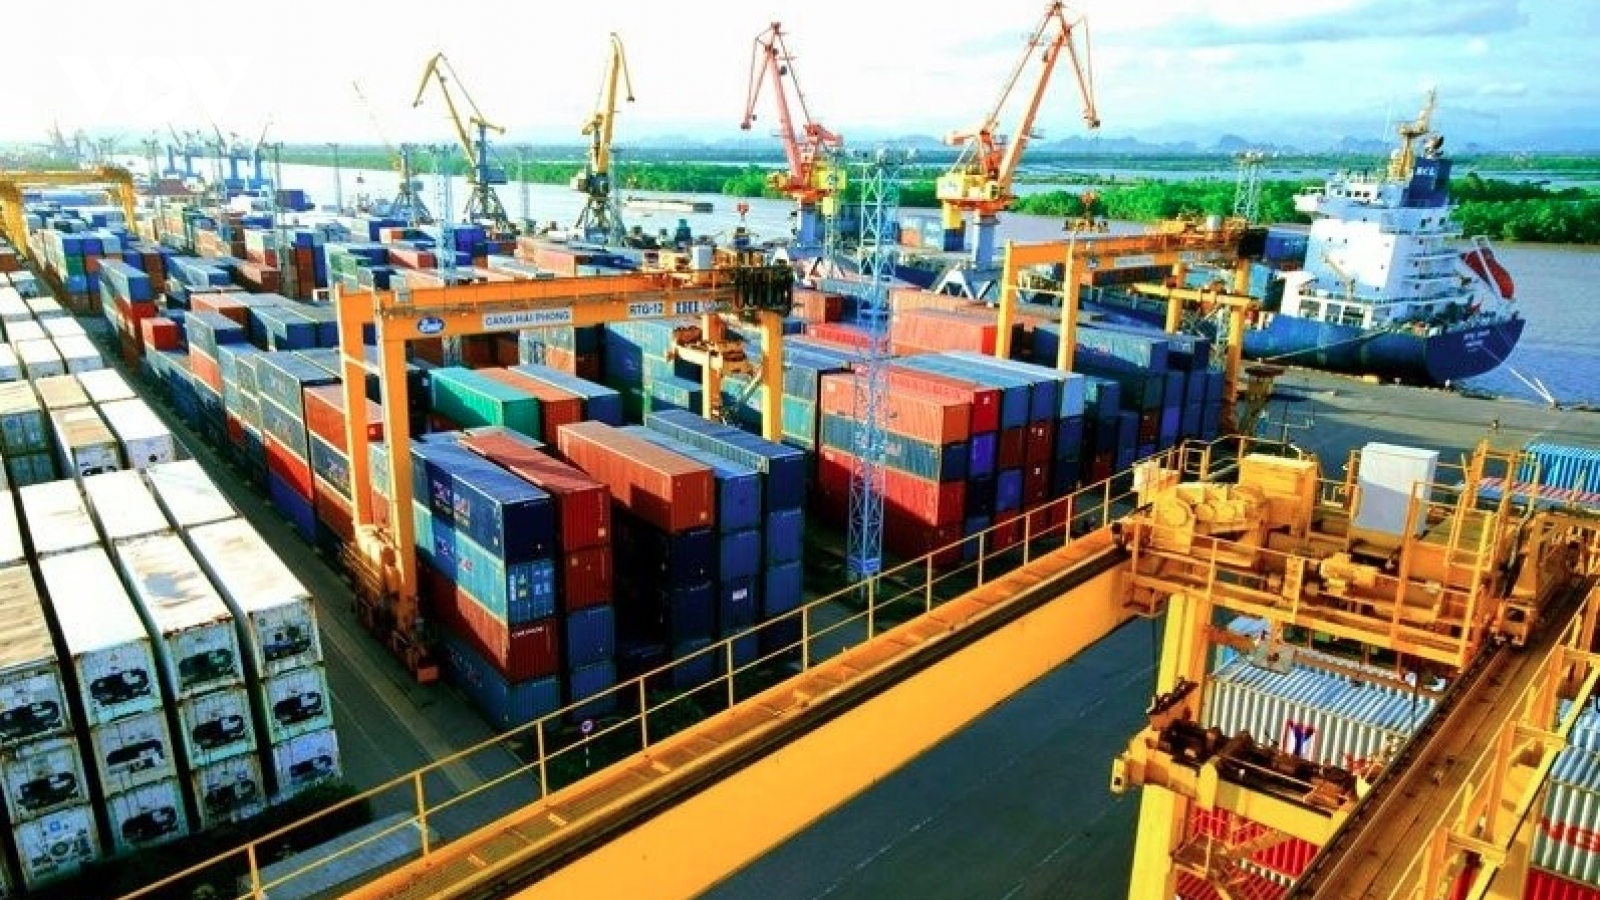 Export turnover set to reach US$377 billion in 2004 amid global uncertainties